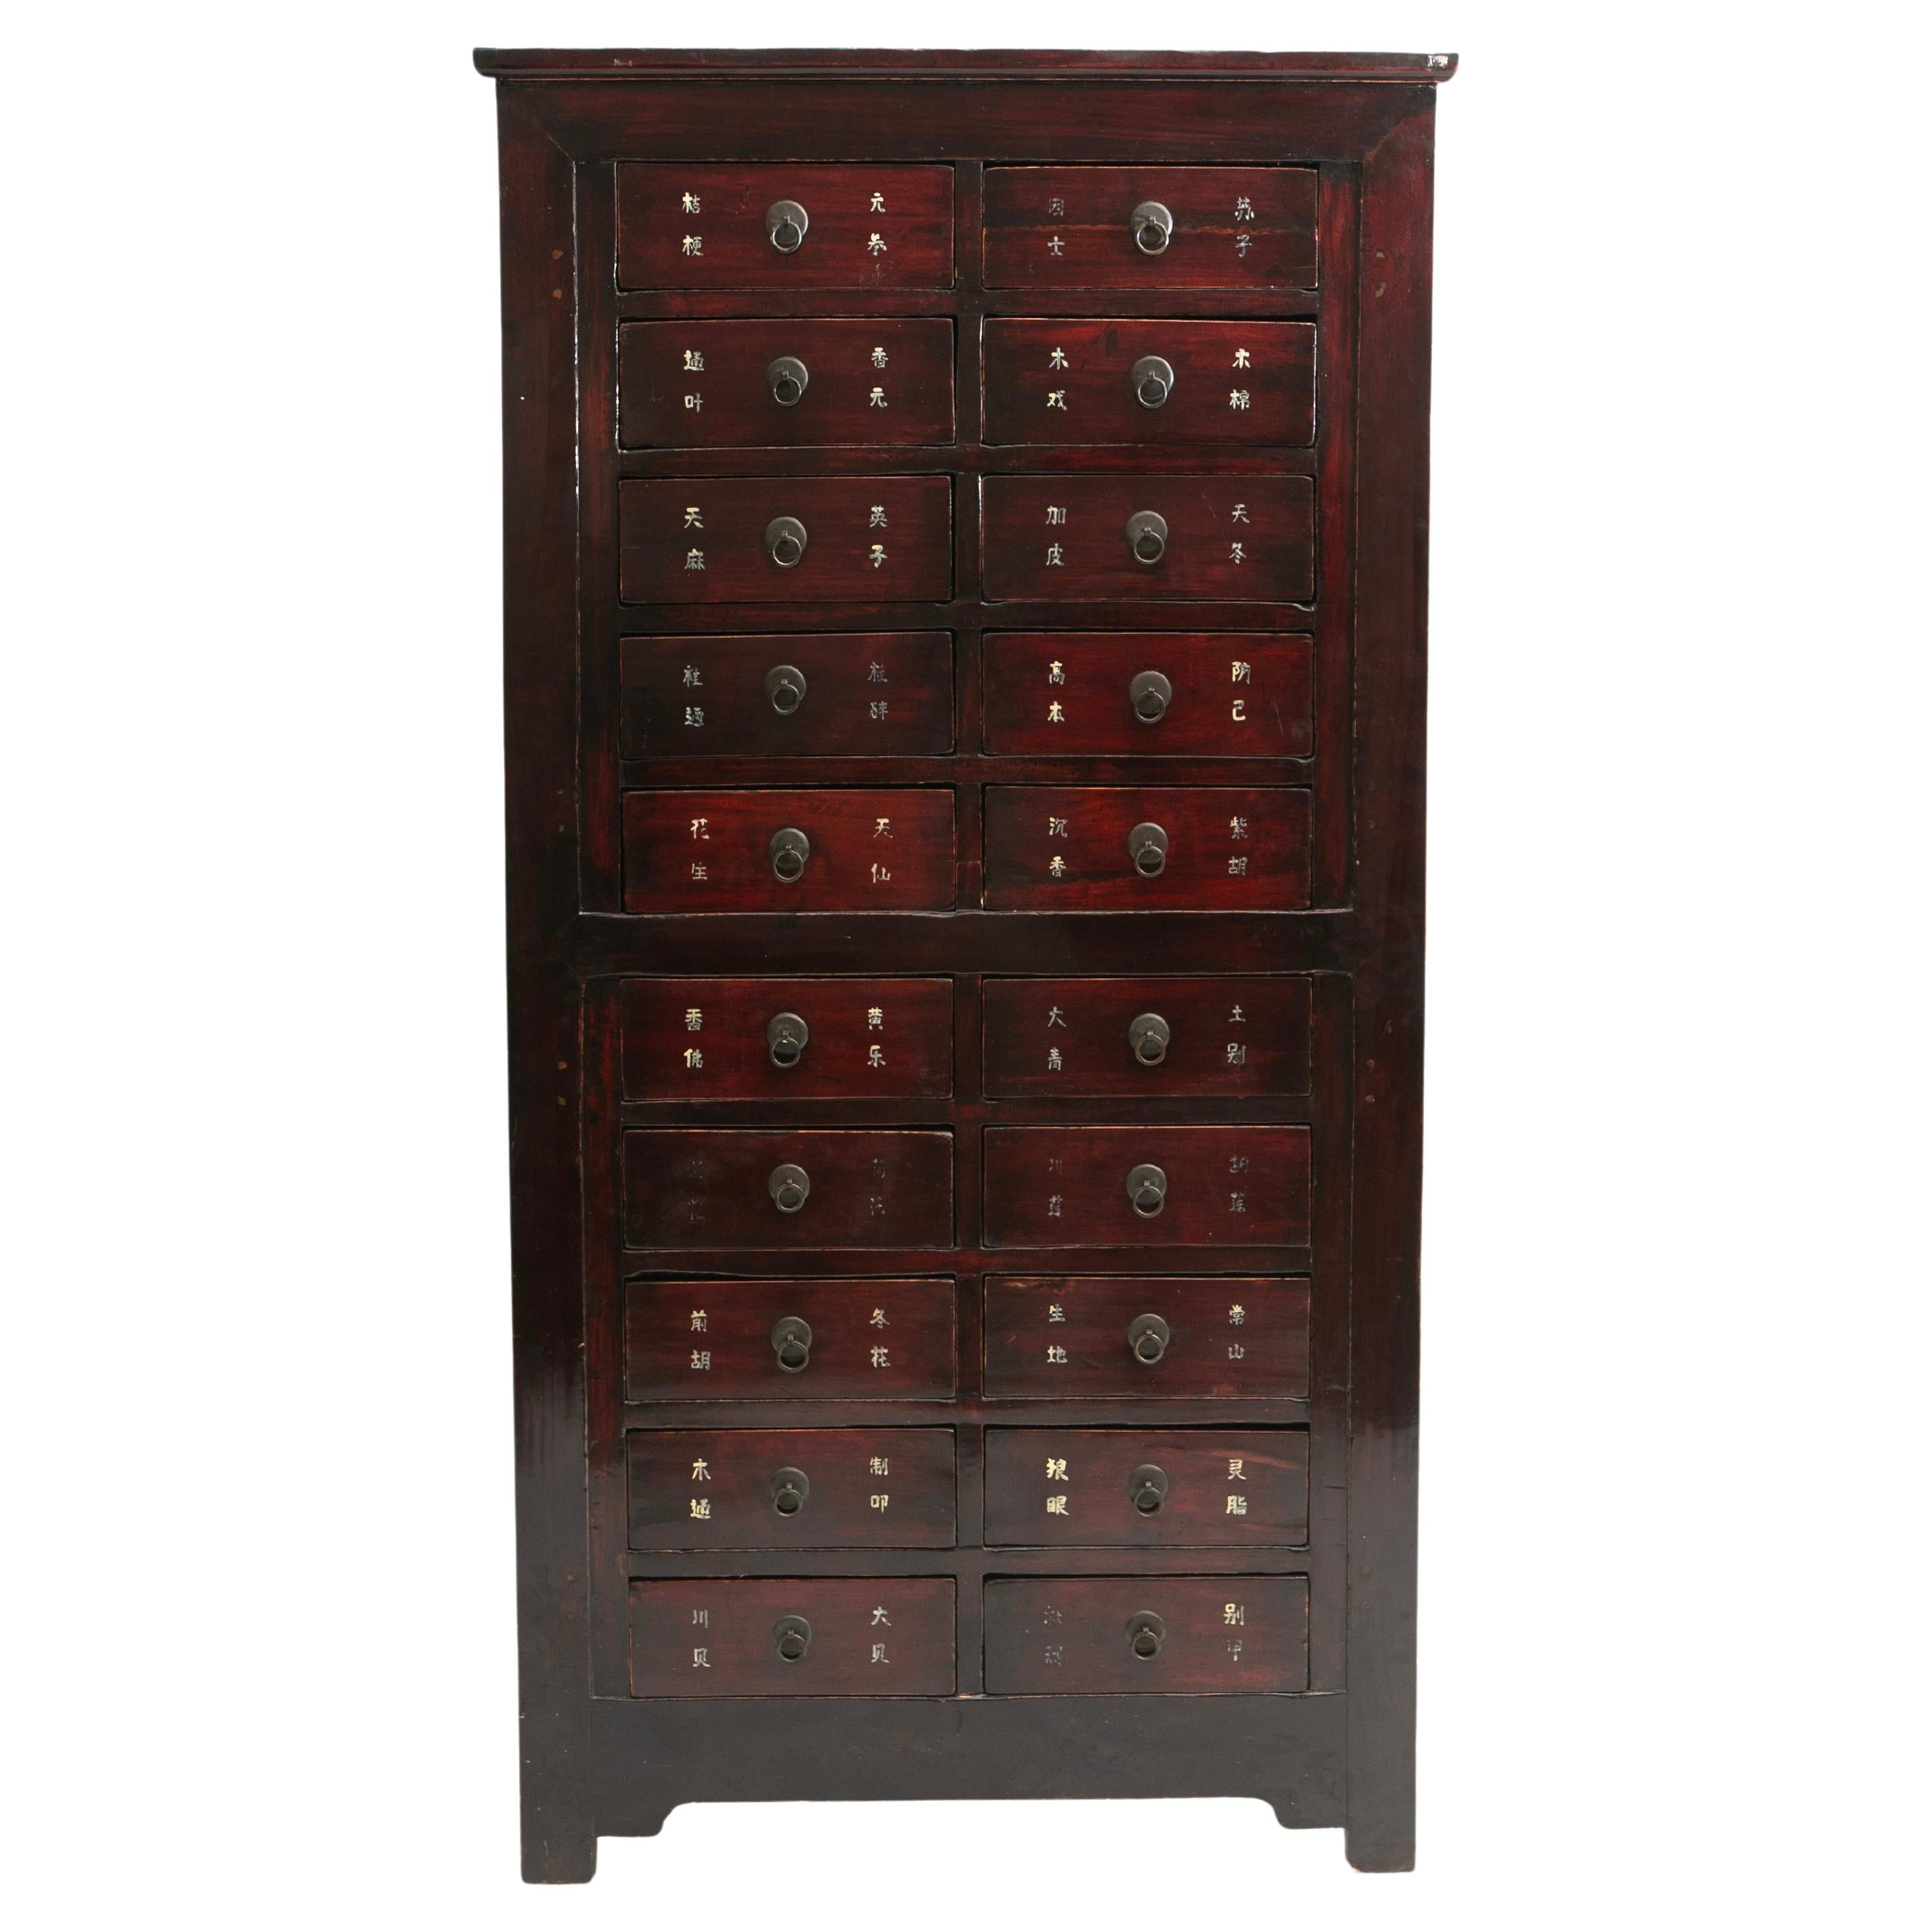 Chinese Burgundy Brown Herbal Apothecary Chest, Late 19th Century